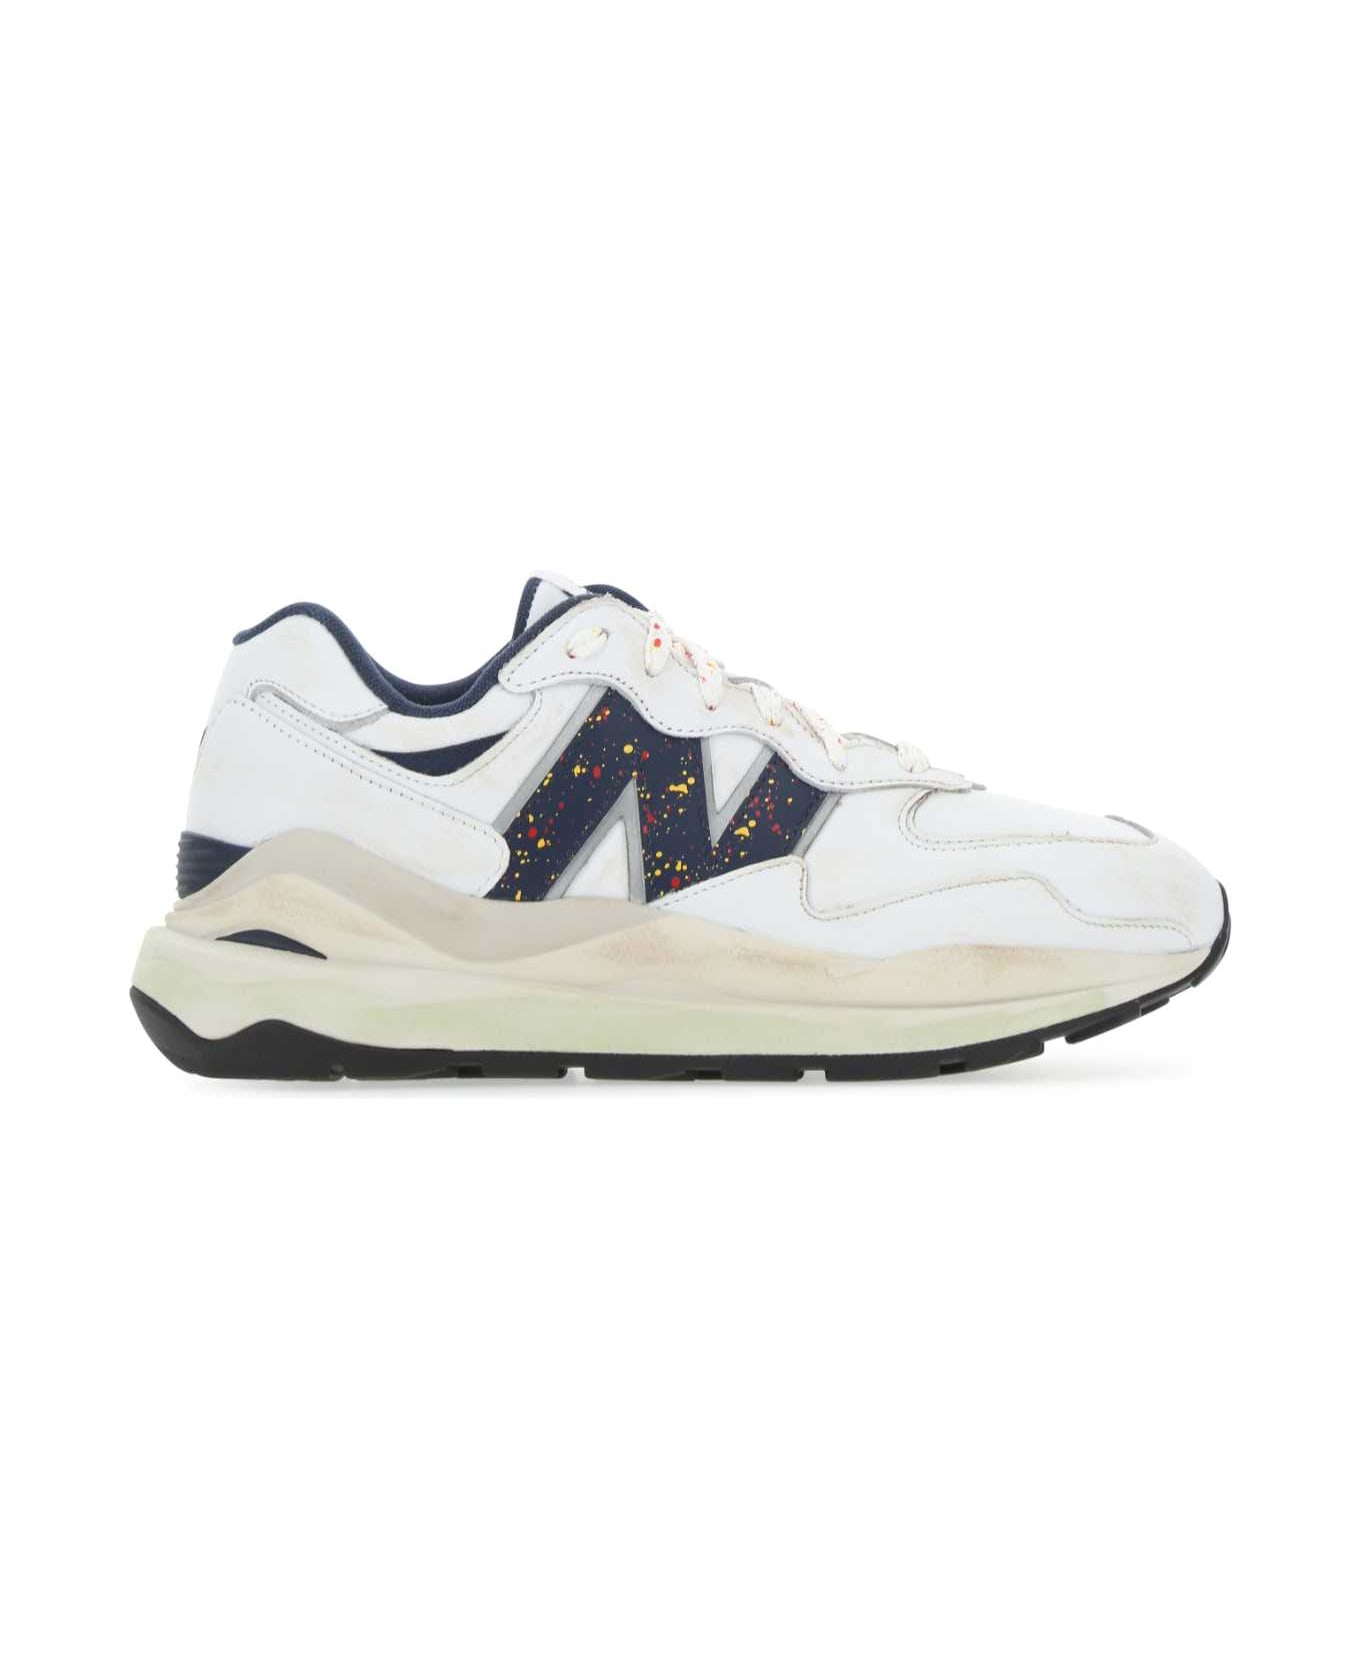 New Balance White Leather 57/40 Sneakers - WHITE